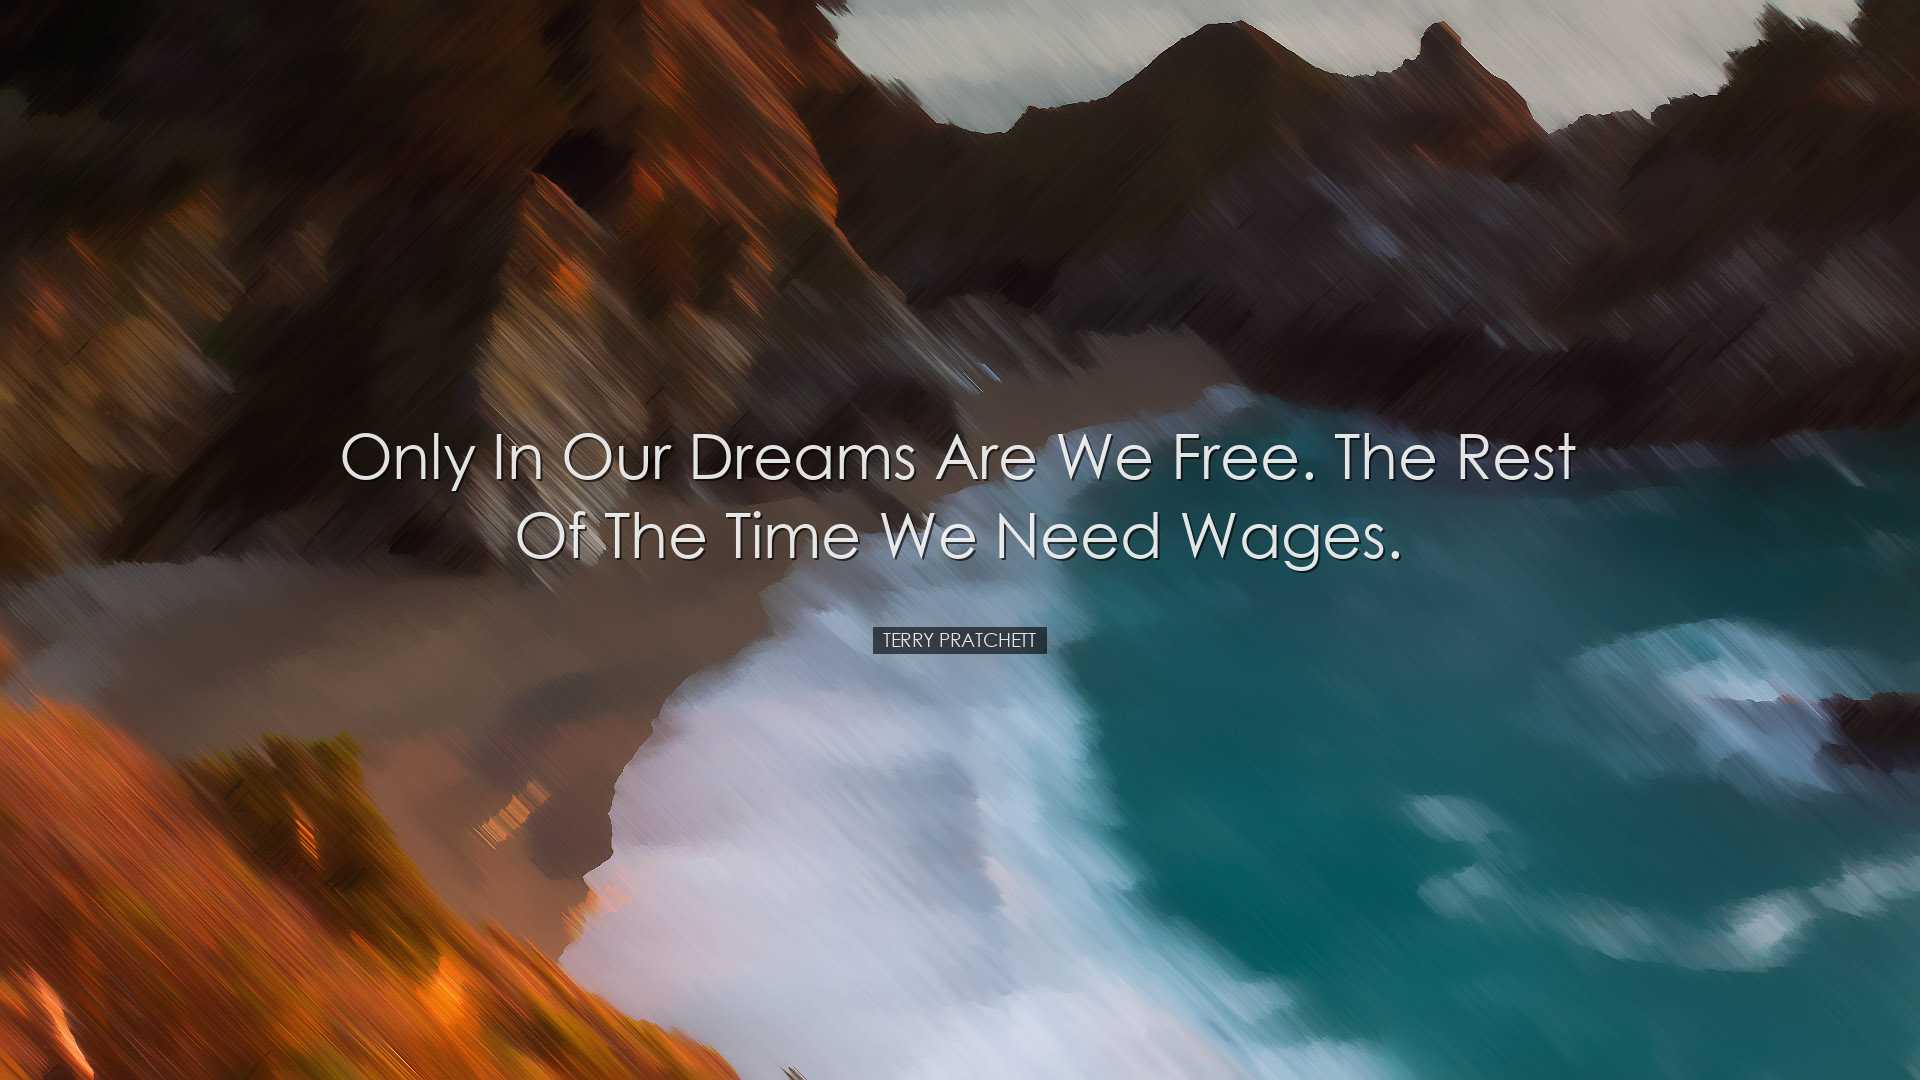 Only in our dreams are we free. The rest of the time we need wages